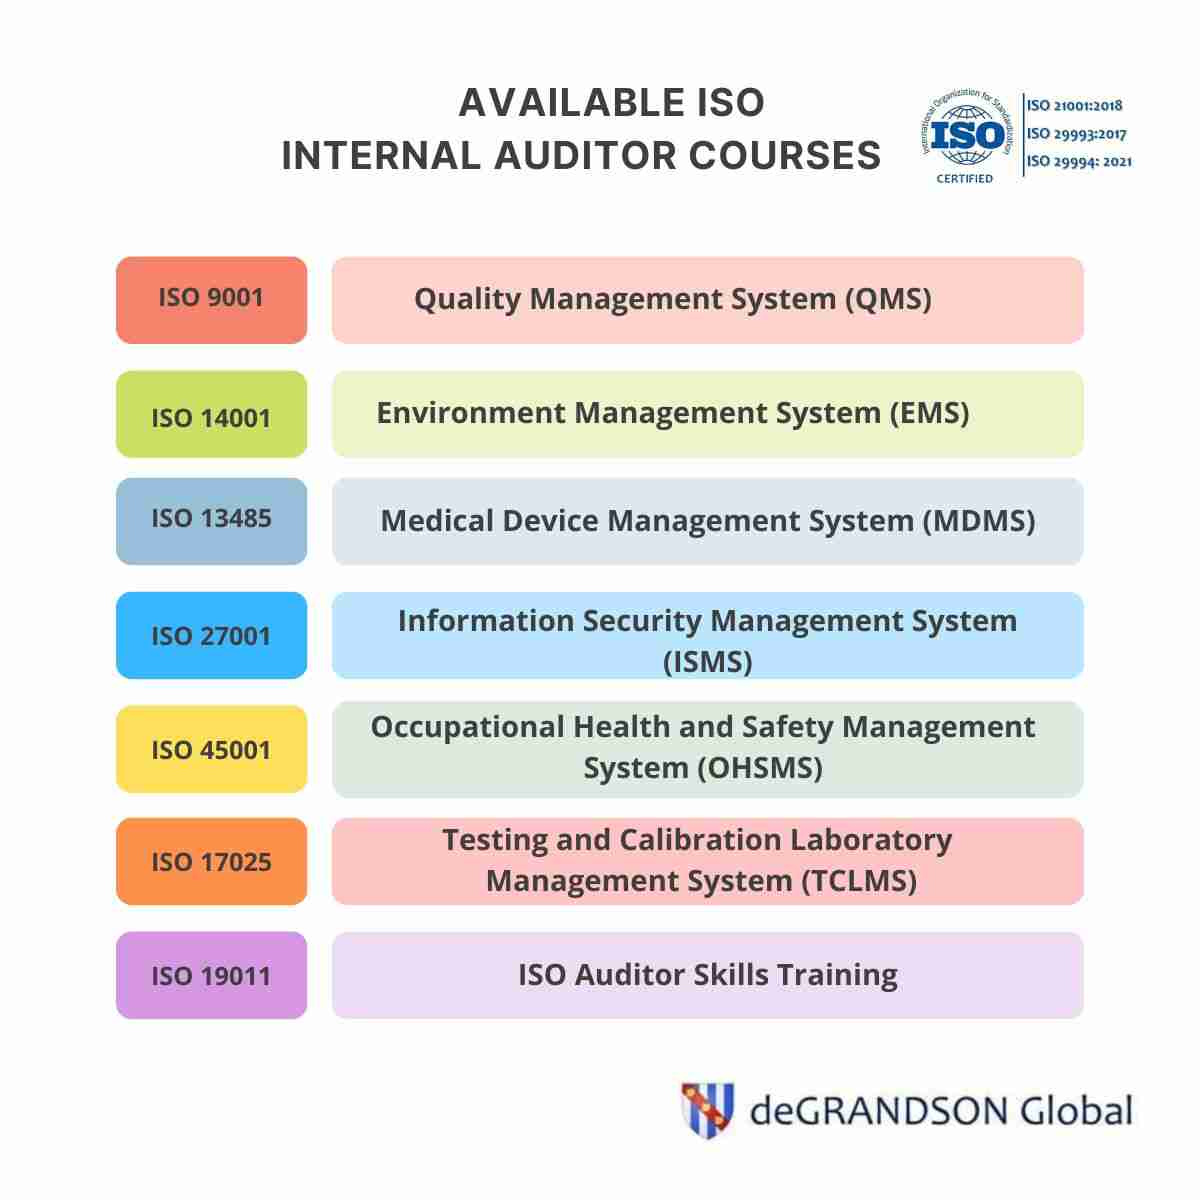 List of ISO Internal Auditor Training Courses offered by deGRANDSON Global